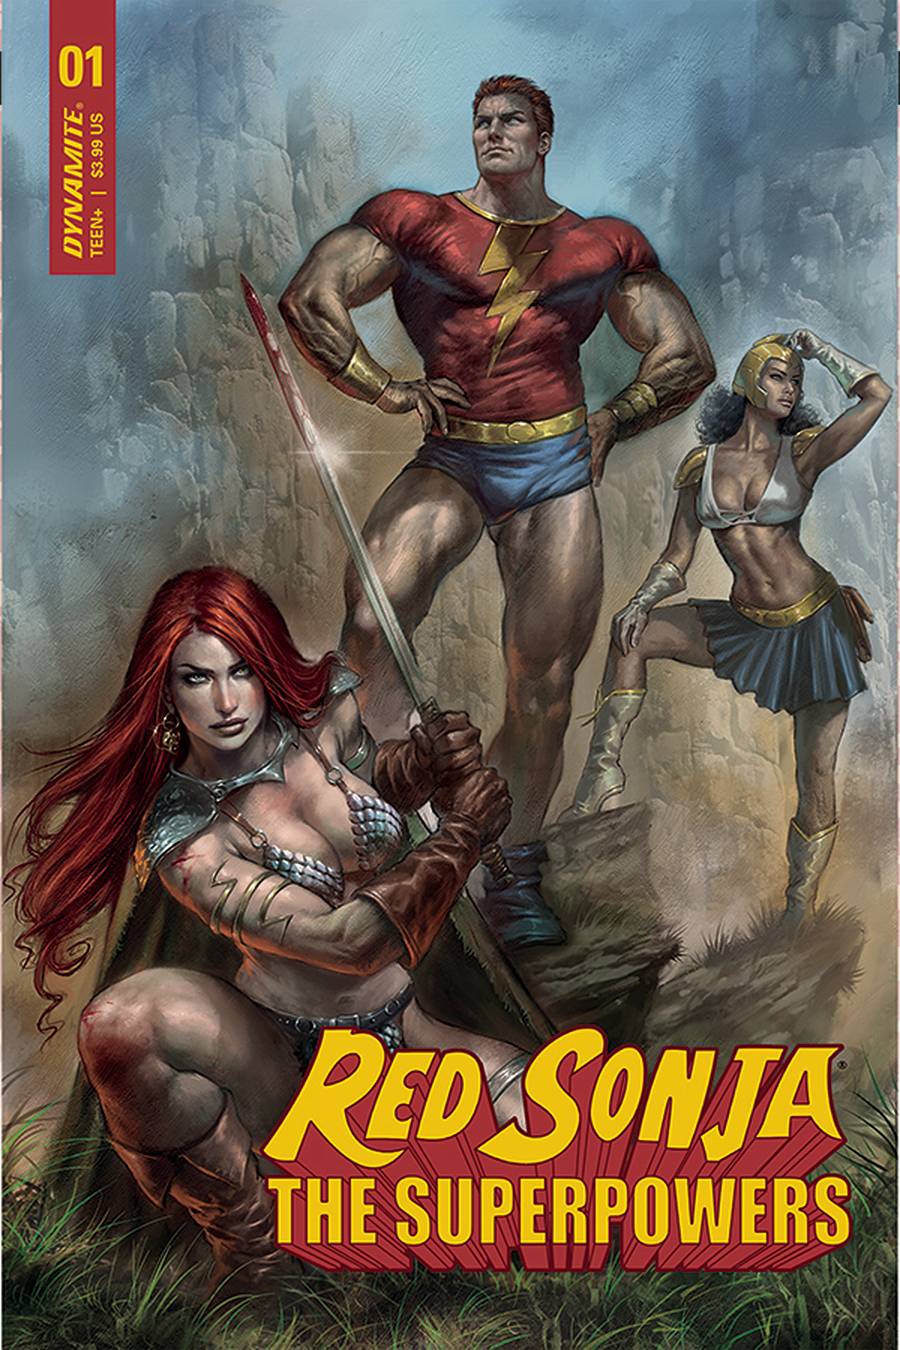 RED SONJA THE SUPERPOWERS #1 CVR A PARRILLO